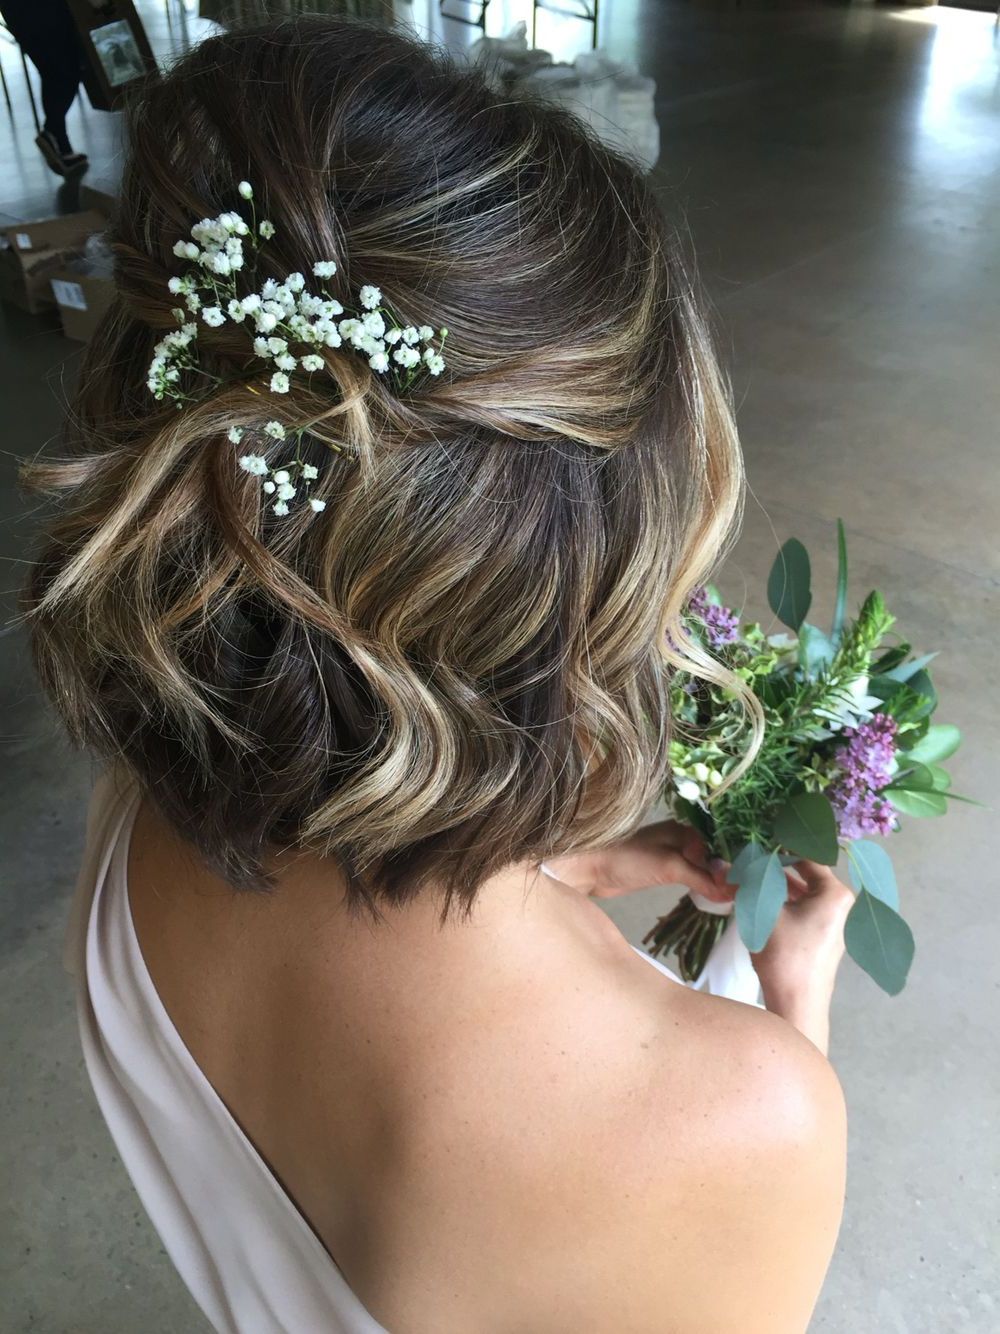 Pinlyss Laurens On Short Hairstyles | Pinterest | Wedding With Short Hairstyles For Bridesmaids (Photo 1 of 25)